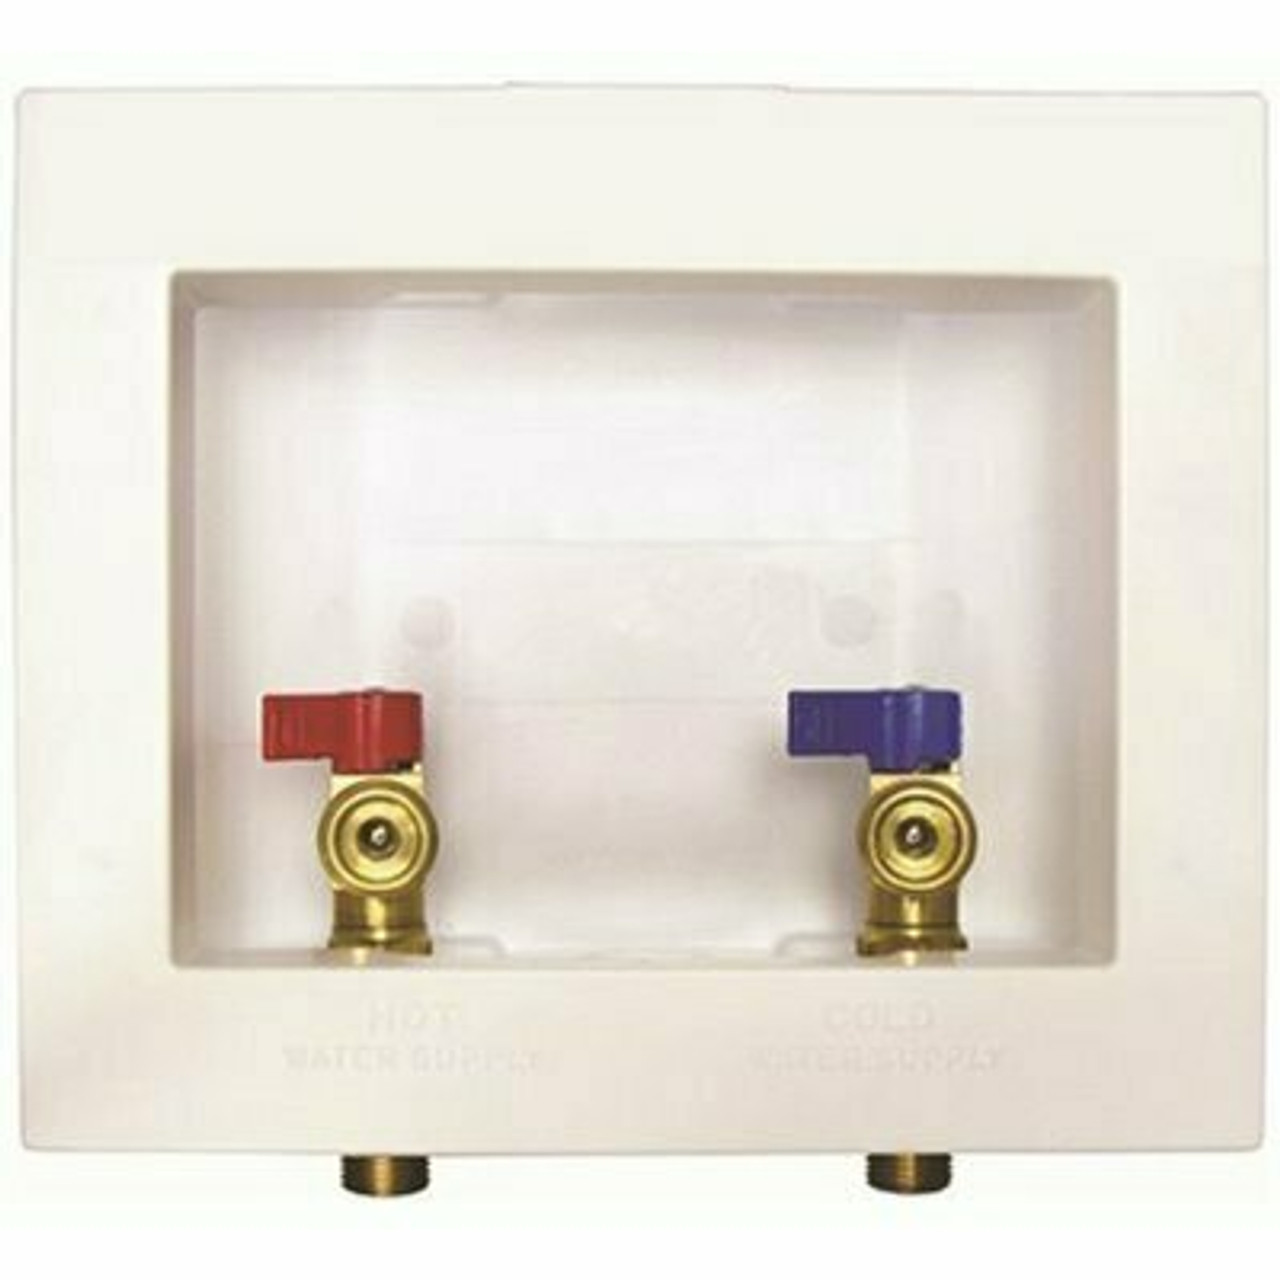 Proplus Washer Outlet Box With Valves